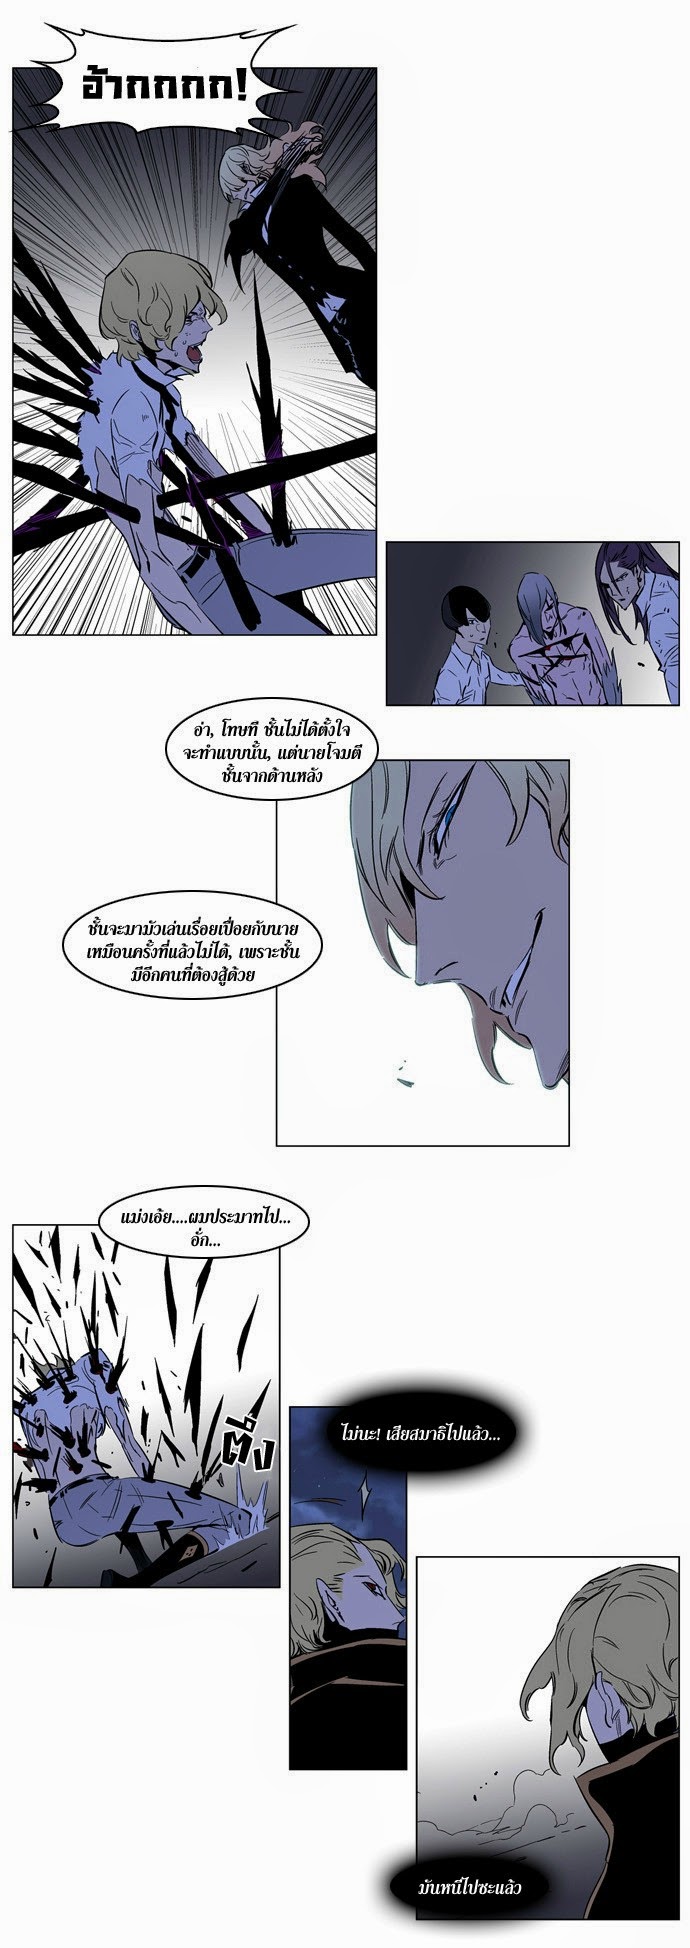 Noblesse 188 019